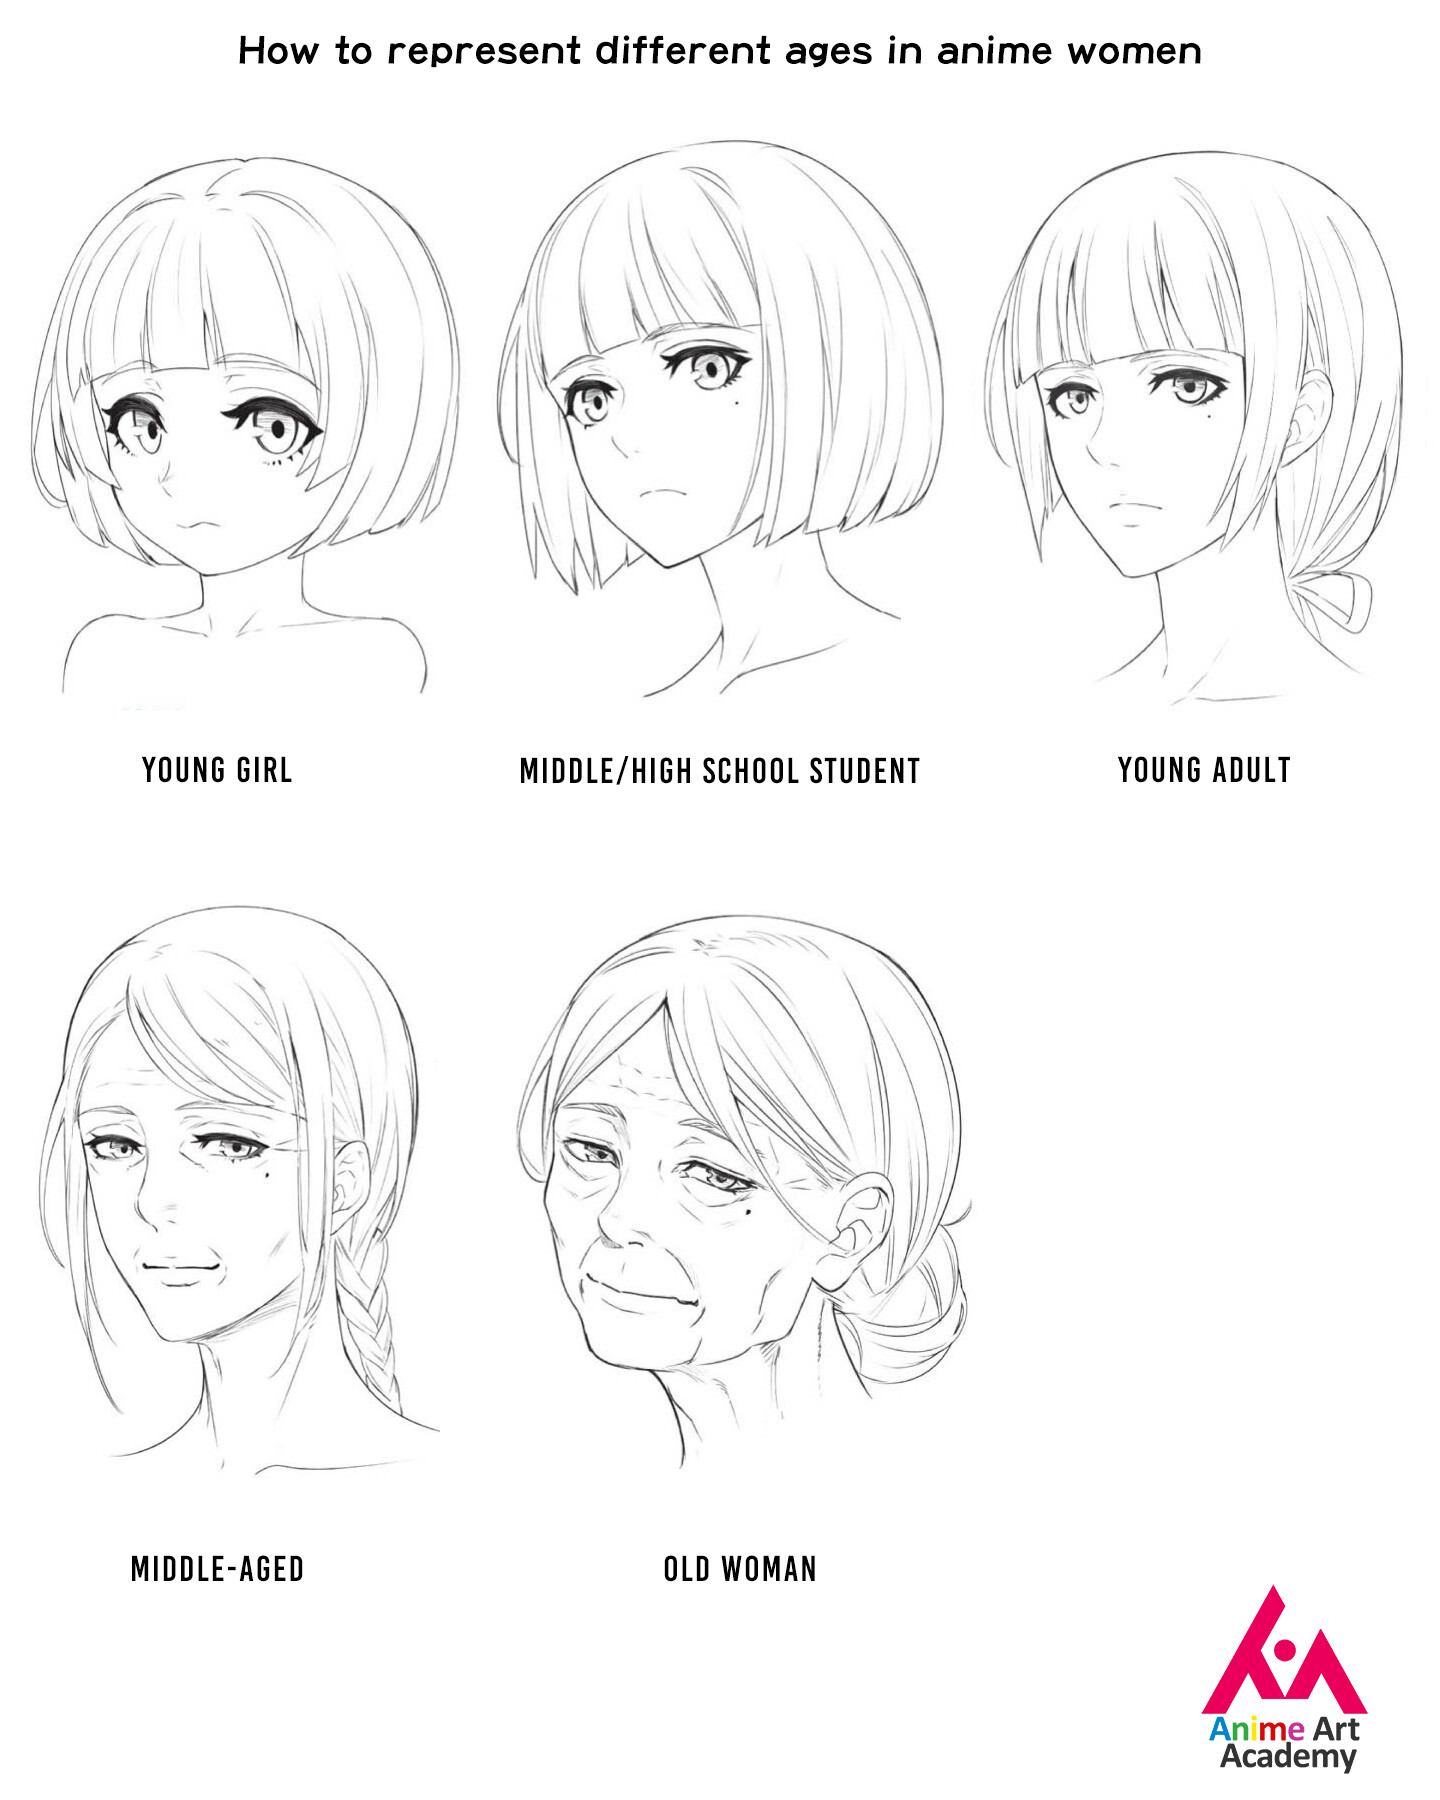 ArtStation - How to represent different ages in anime women